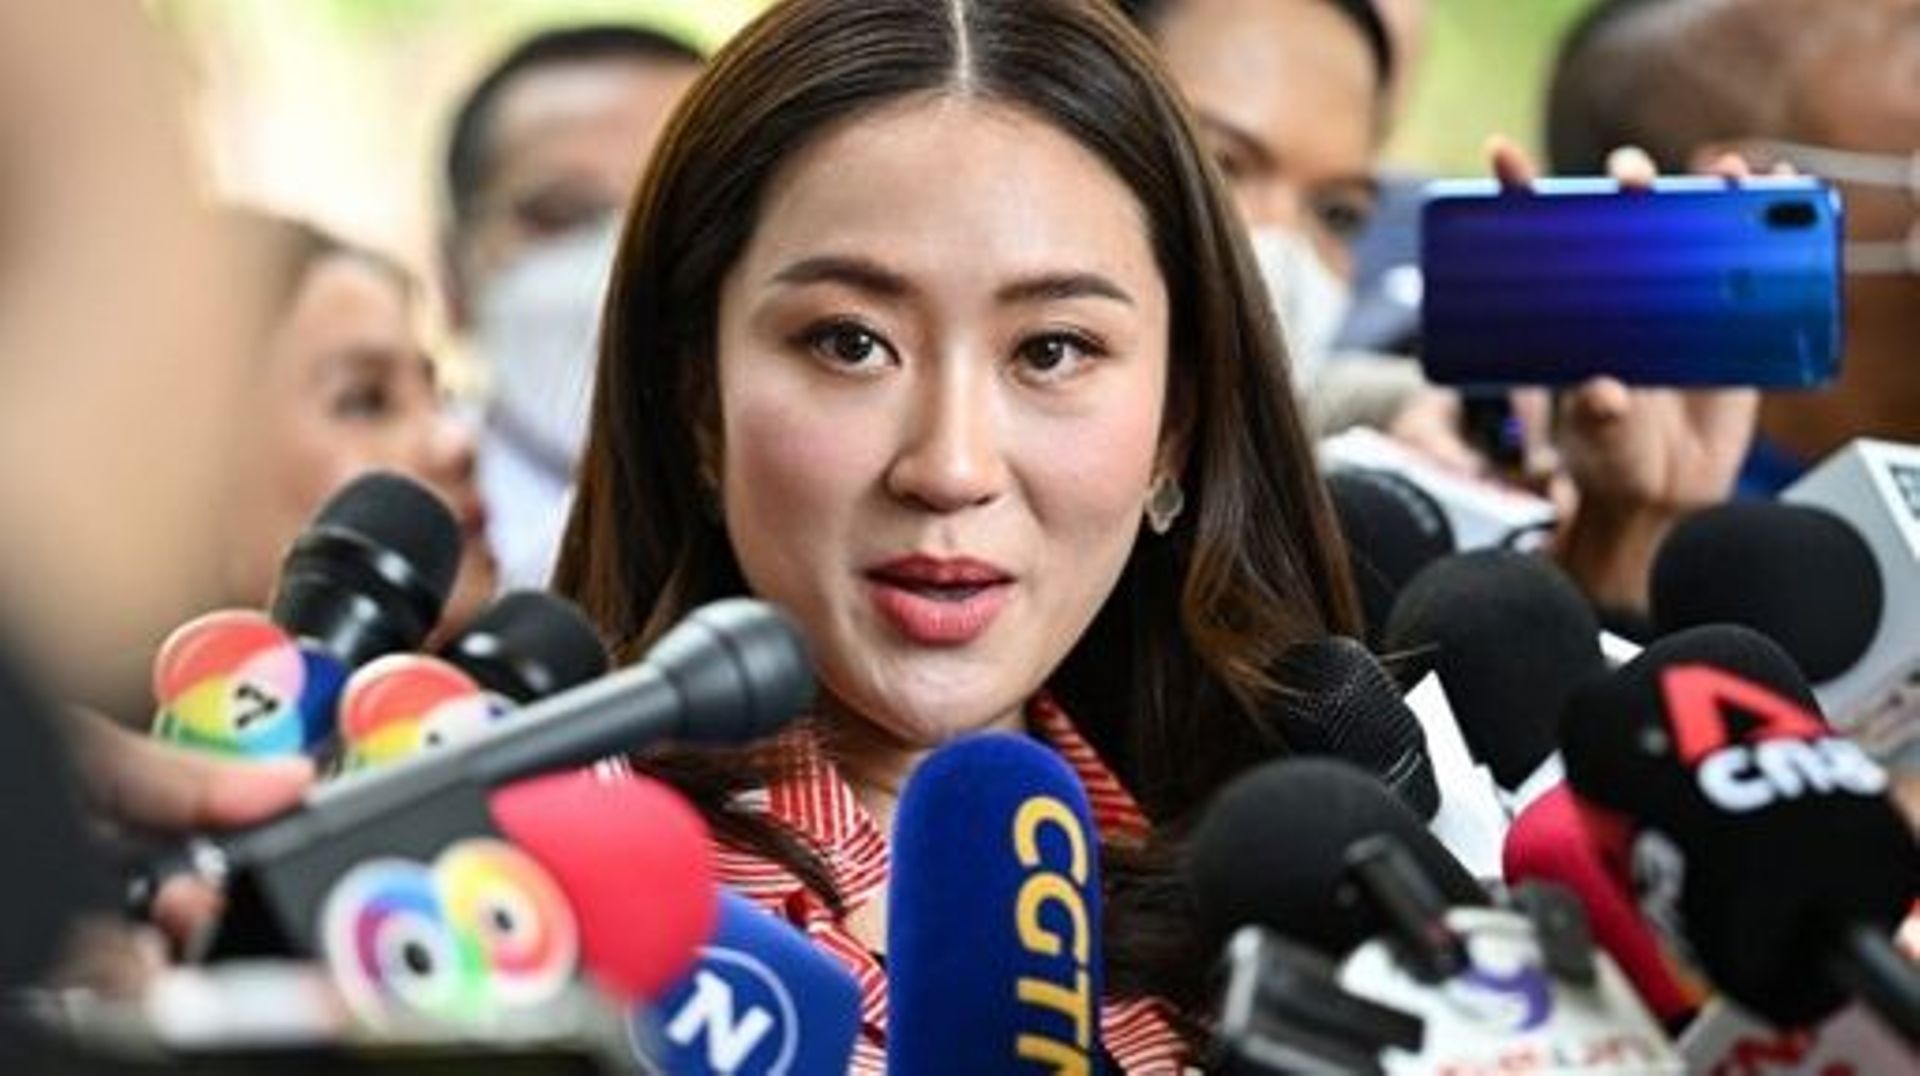 Pheu Thai Party's prime ministerial candidate Paetongtarn Shinawatra speaks to the press after casting her ballot at a polling station during Thailand's general election in Bangkok on May 14, 2023.  MANAN VATSYAYANA / AFP